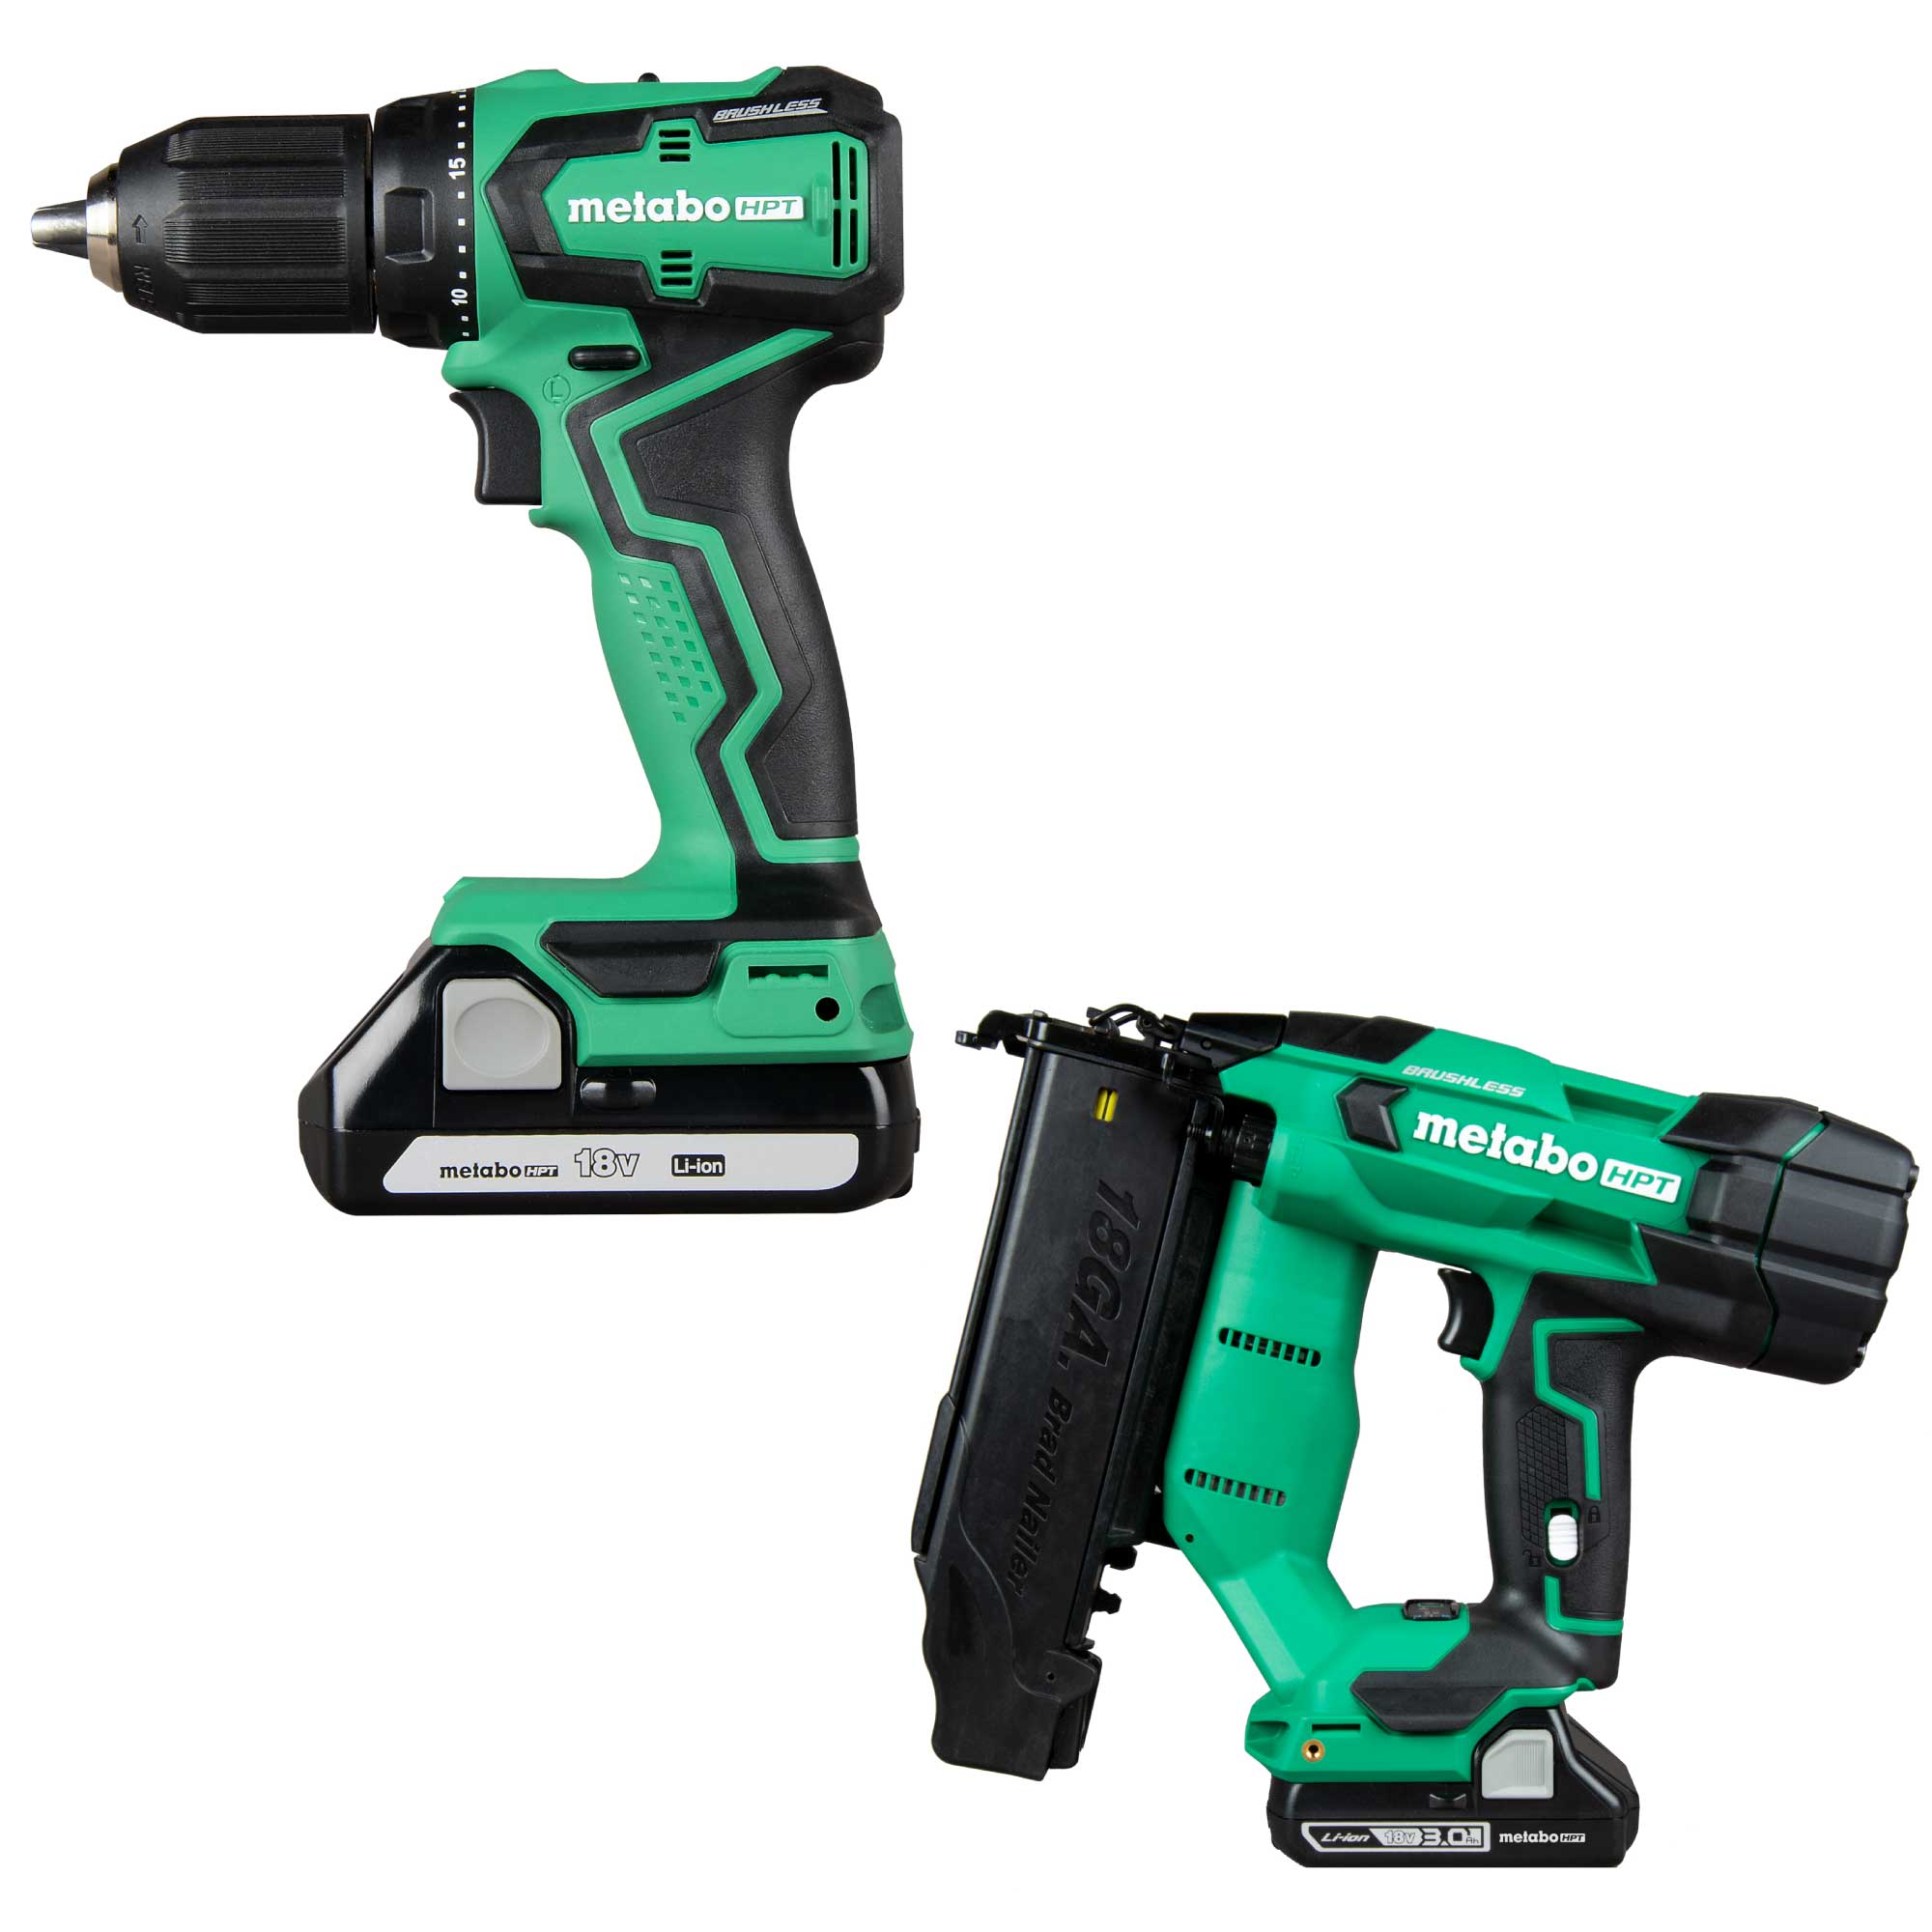 Metabo HPT MultiVolt 18-volt 1/2-in Keyless Brushless Cordless Drill (2-batteries included and Charger included) with MultiVolt 18-Gauge 18-volt